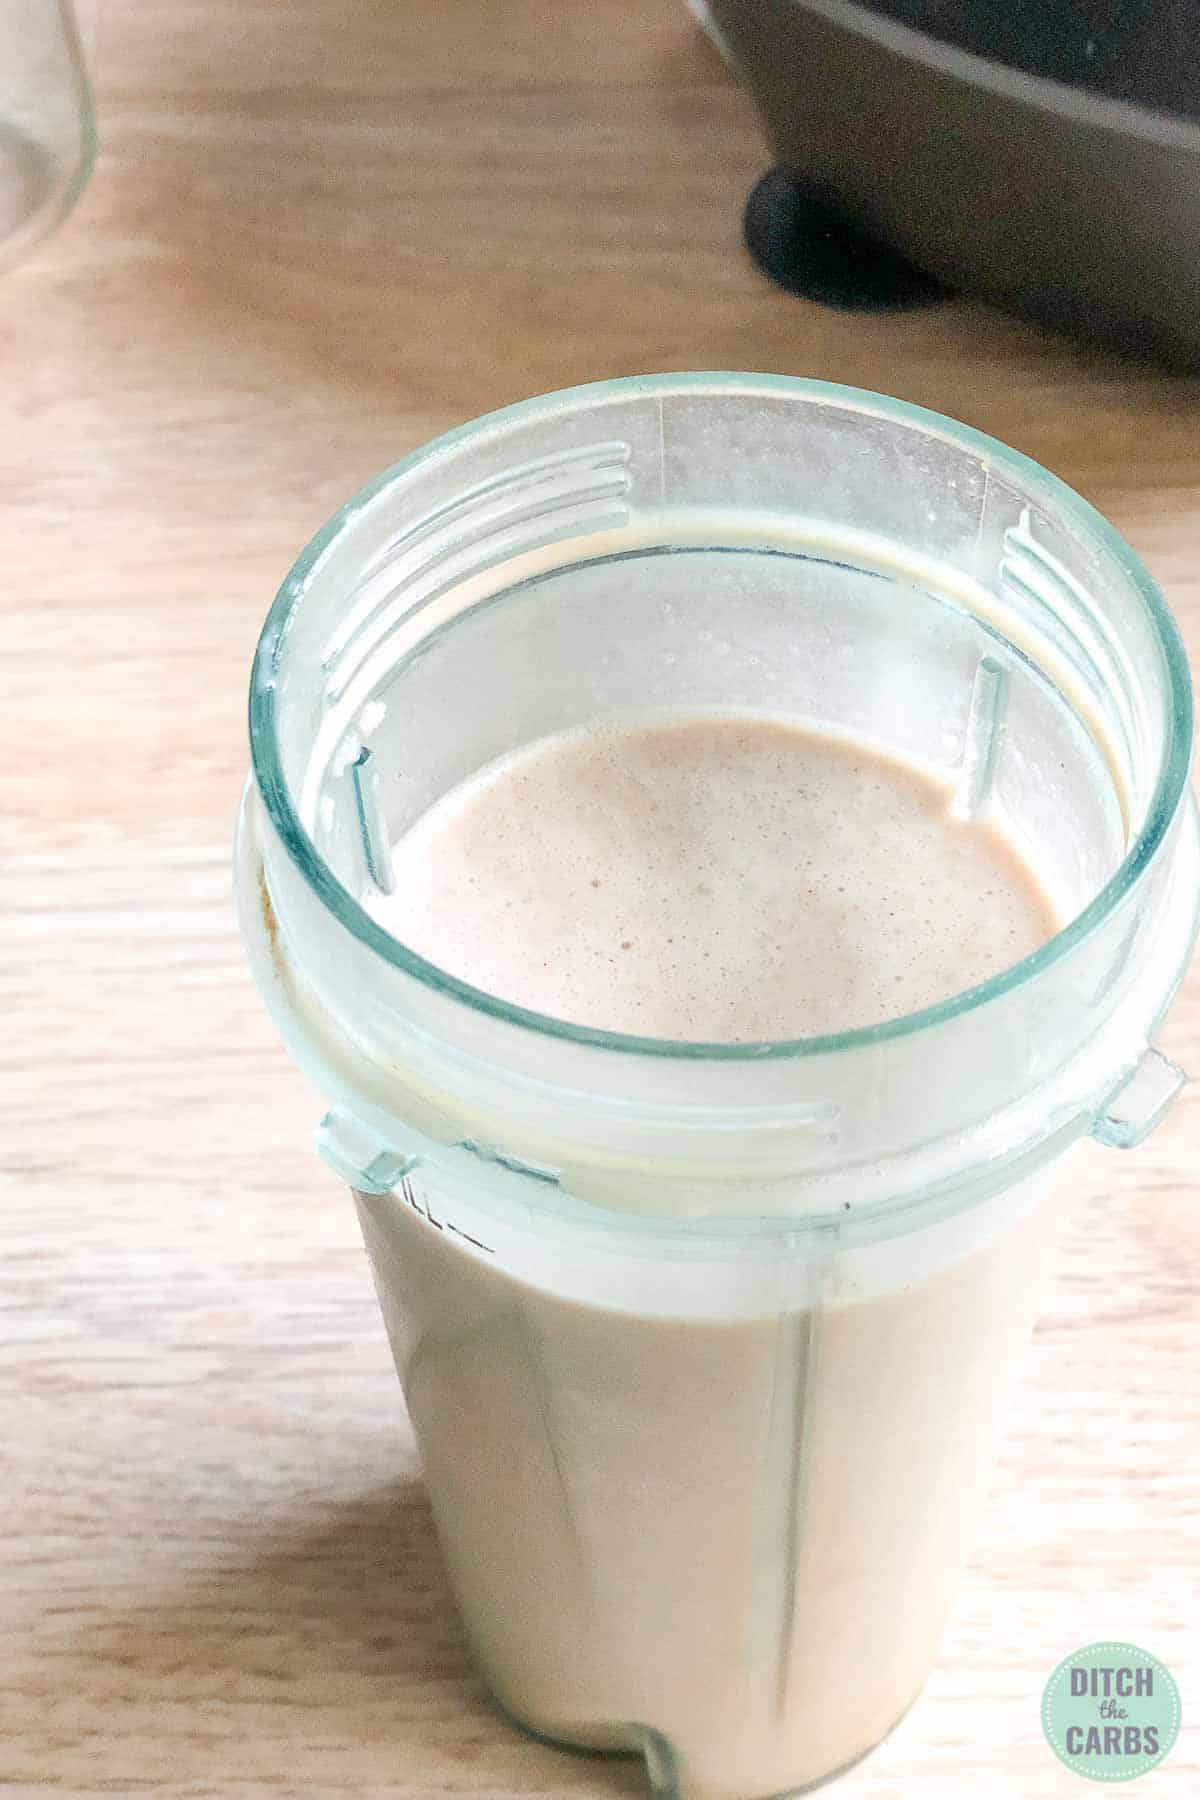 The chocolate peanut butter smoothie has been blended. The lid to the blender has been removed to show the finished smoothie.